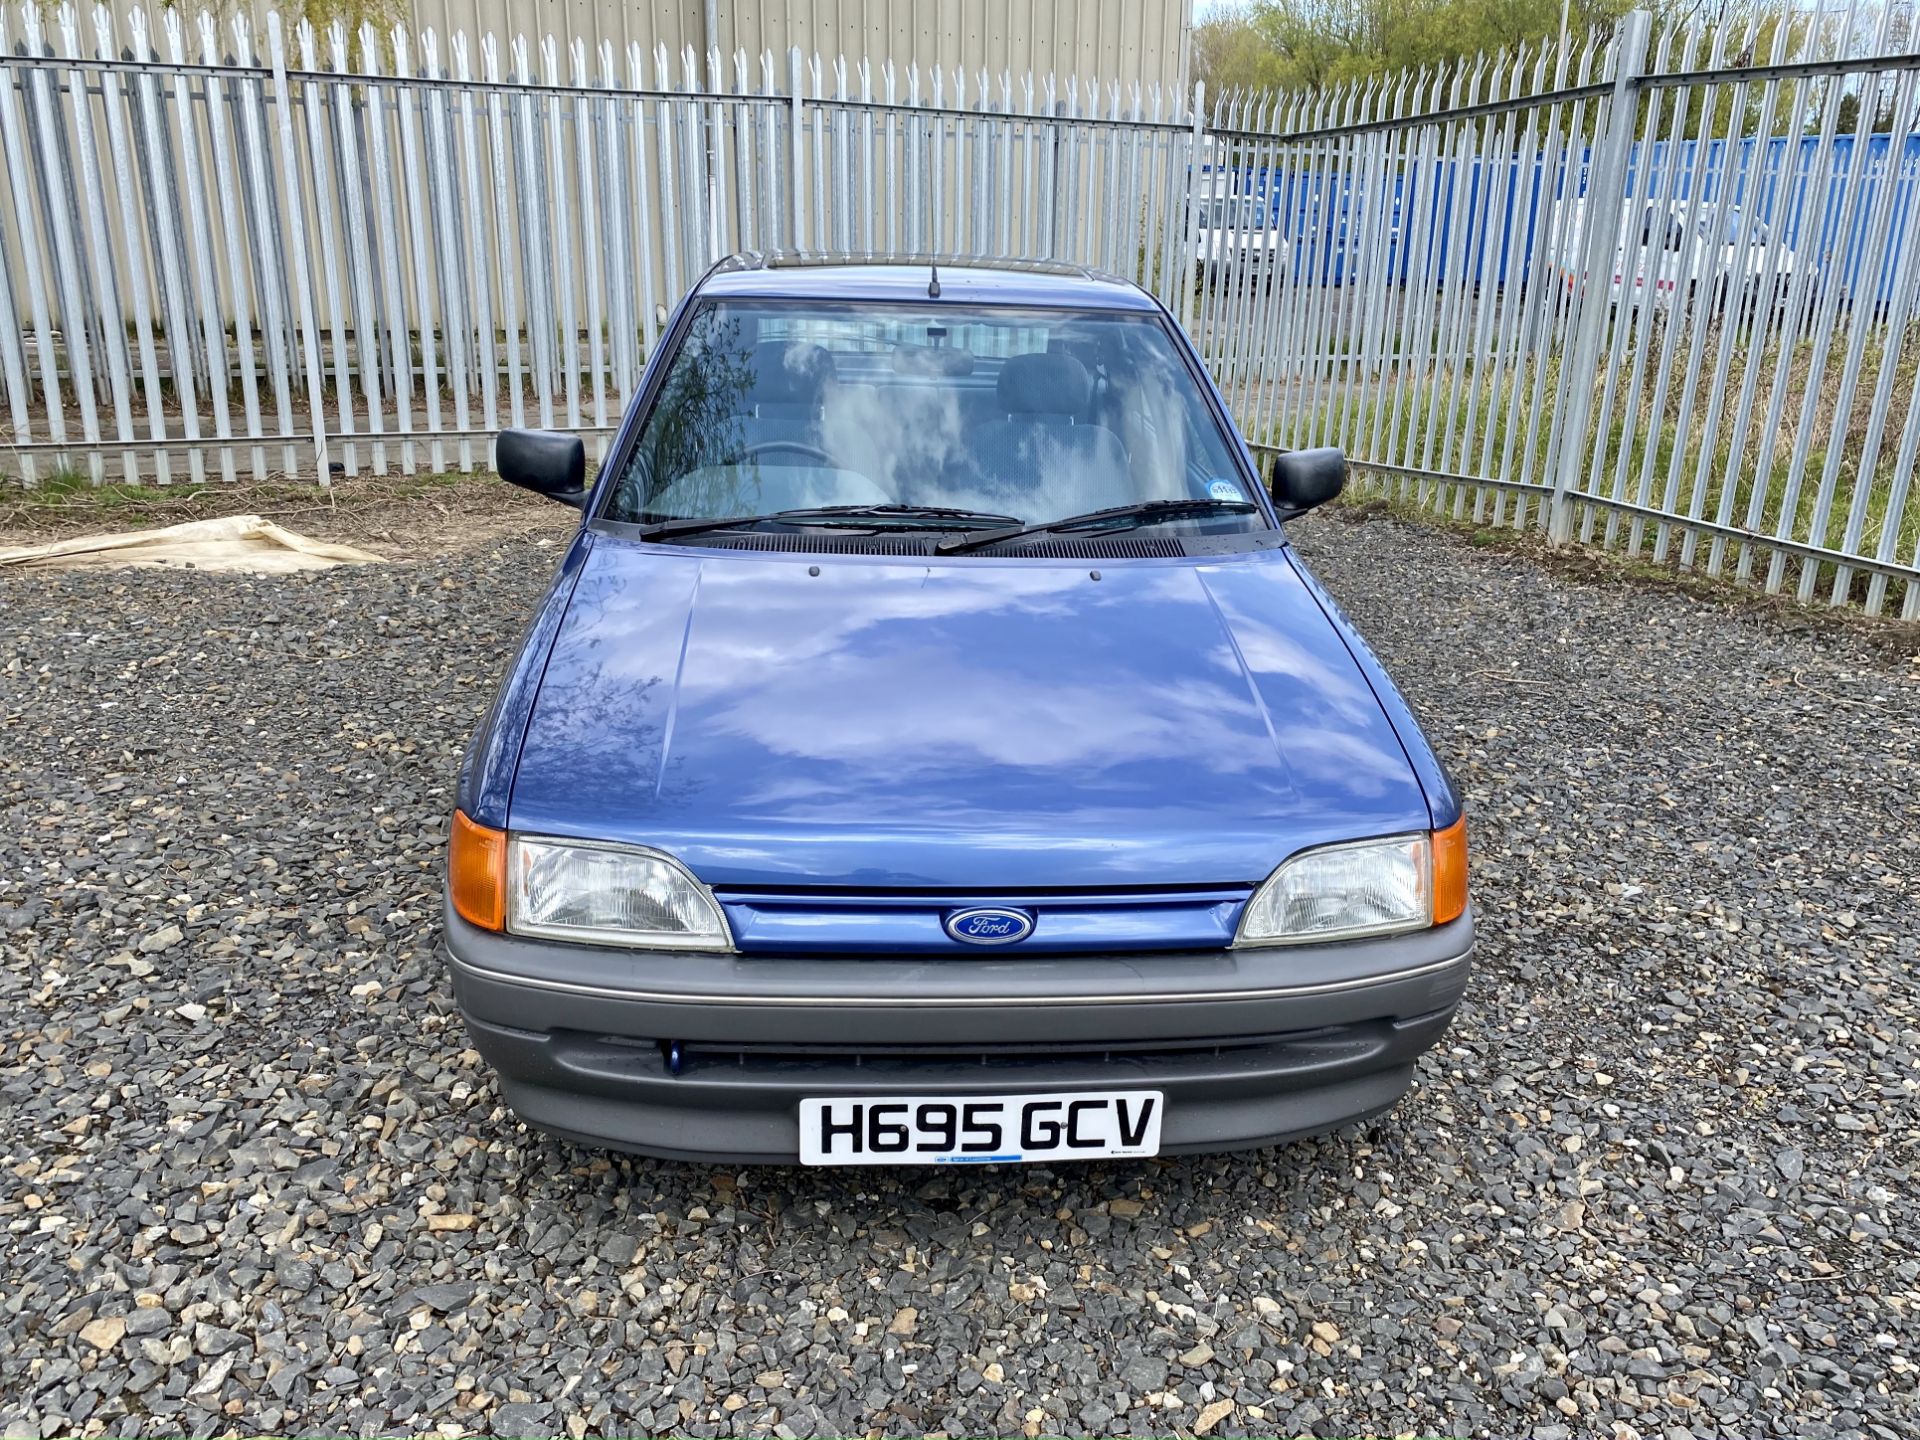 Ford Escort LX1.4 - Image 21 of 54